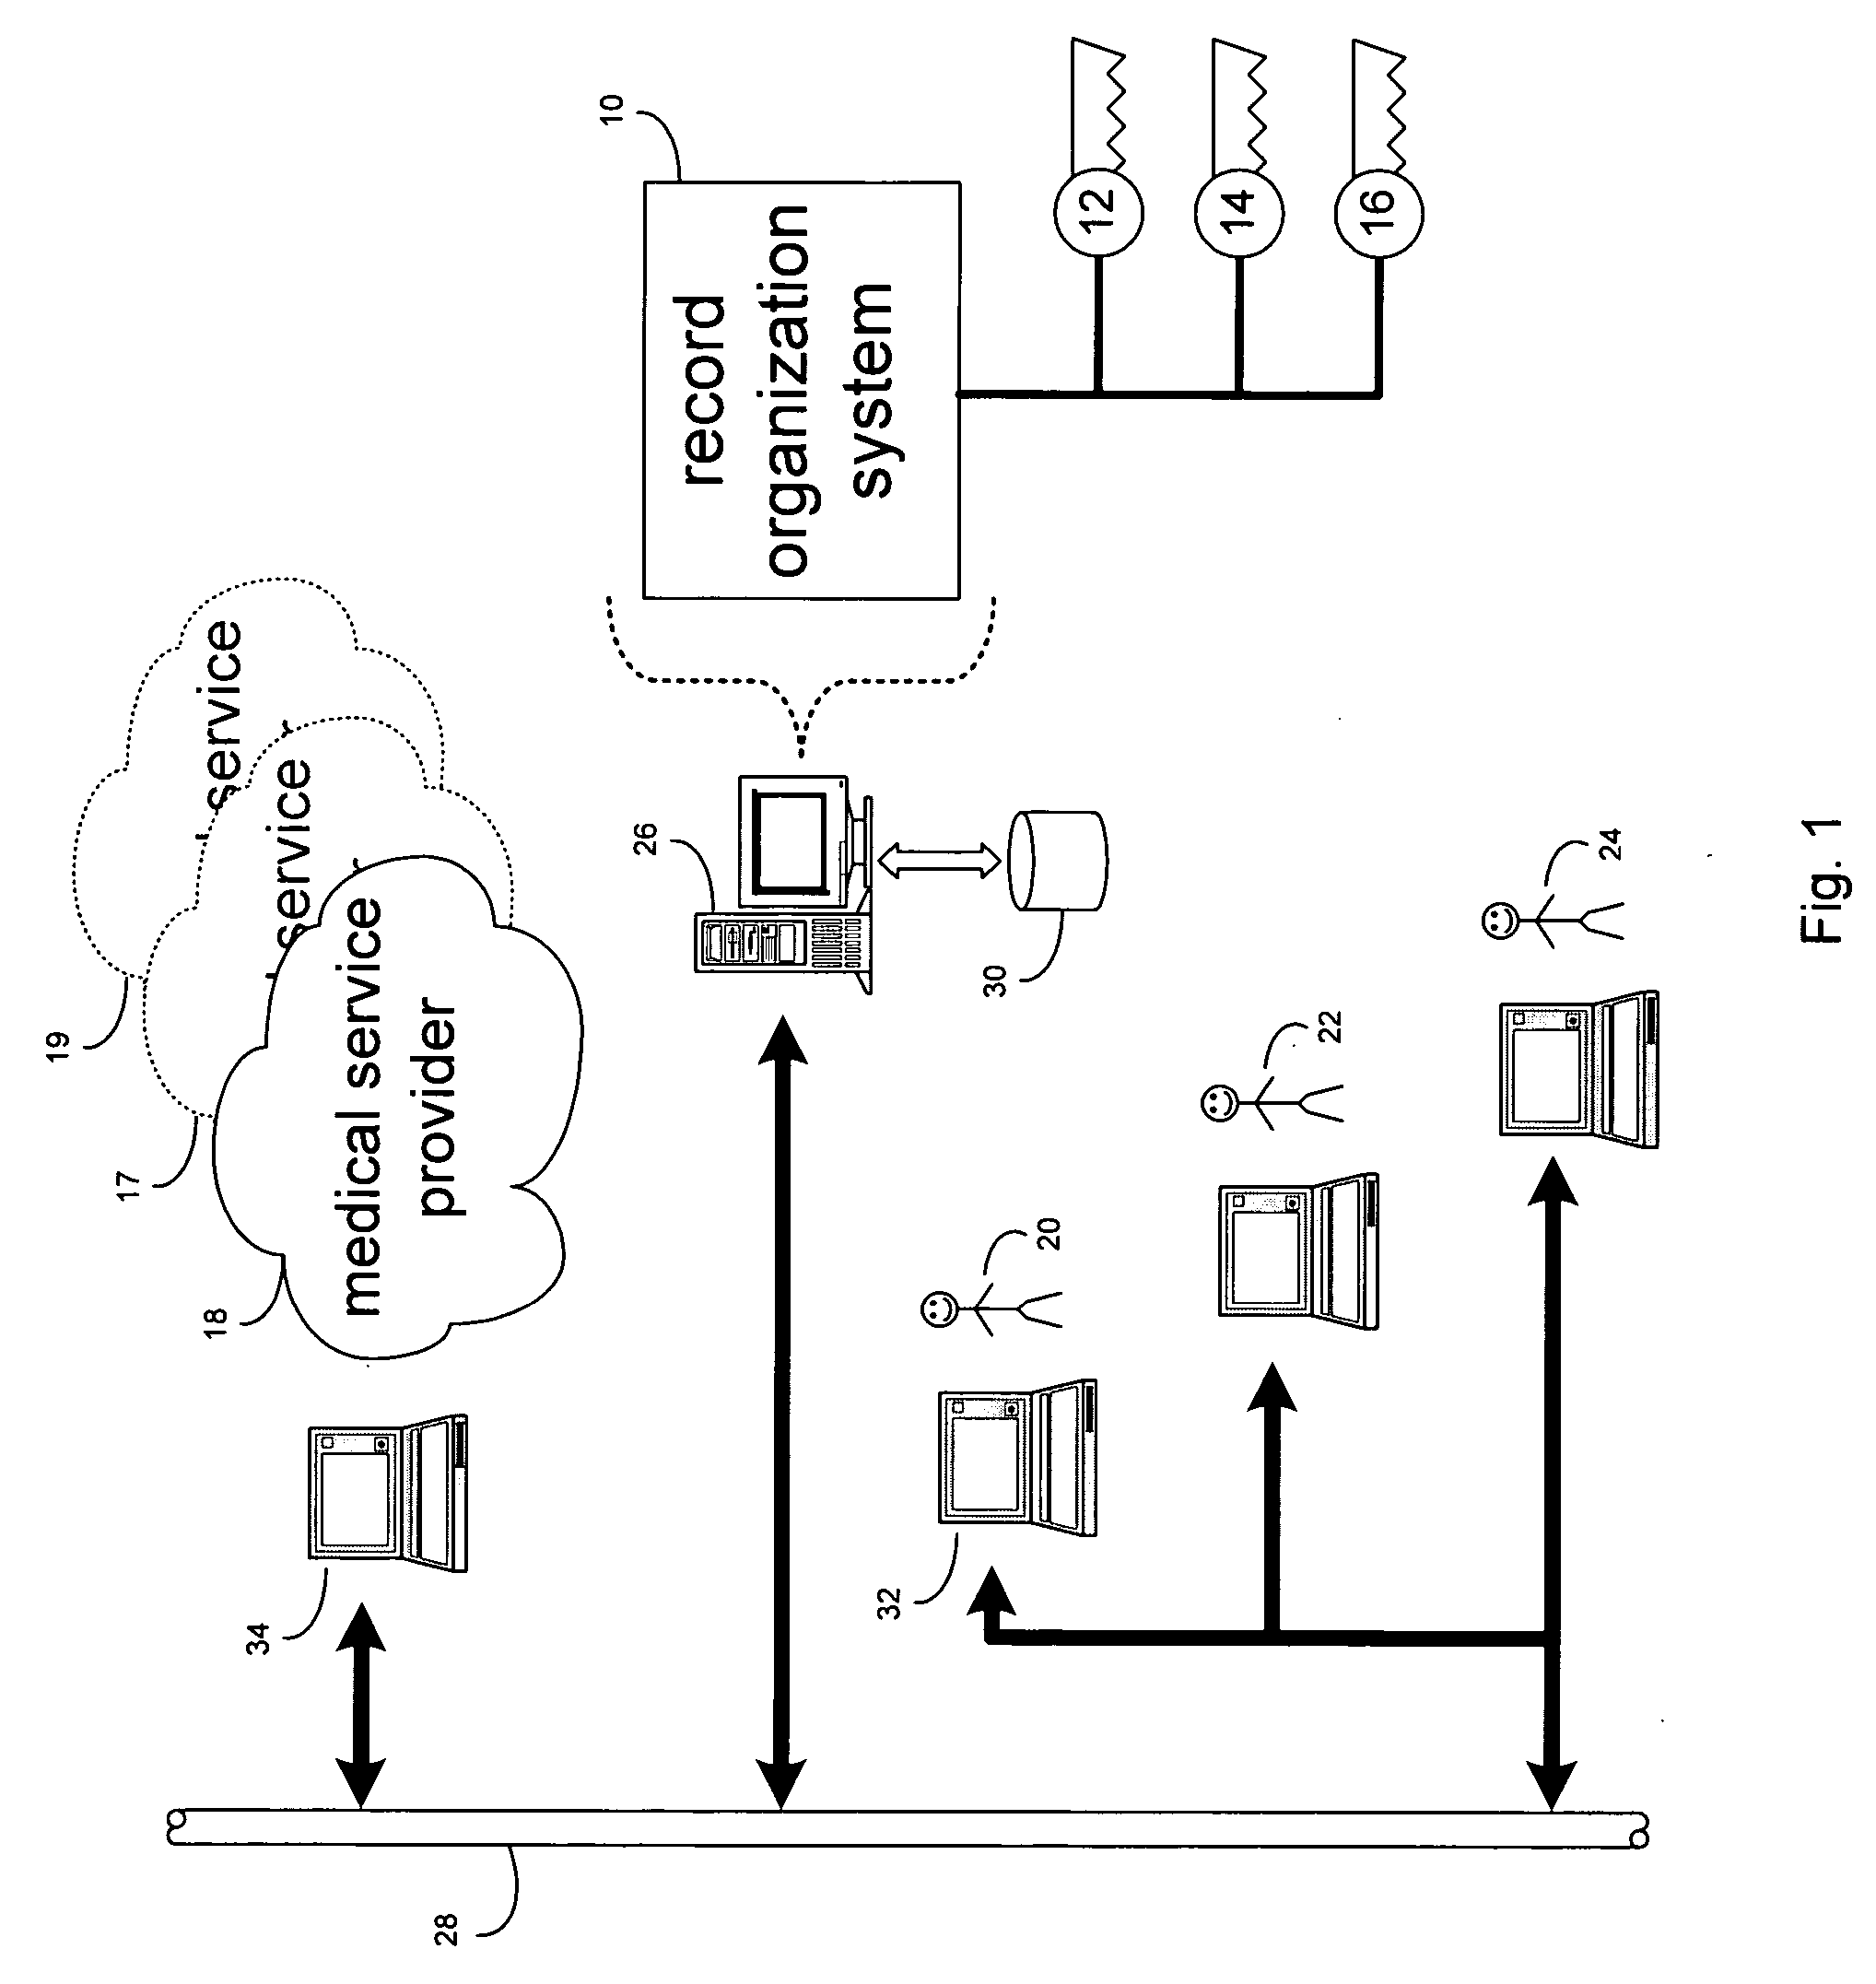 Automated data entry method and system